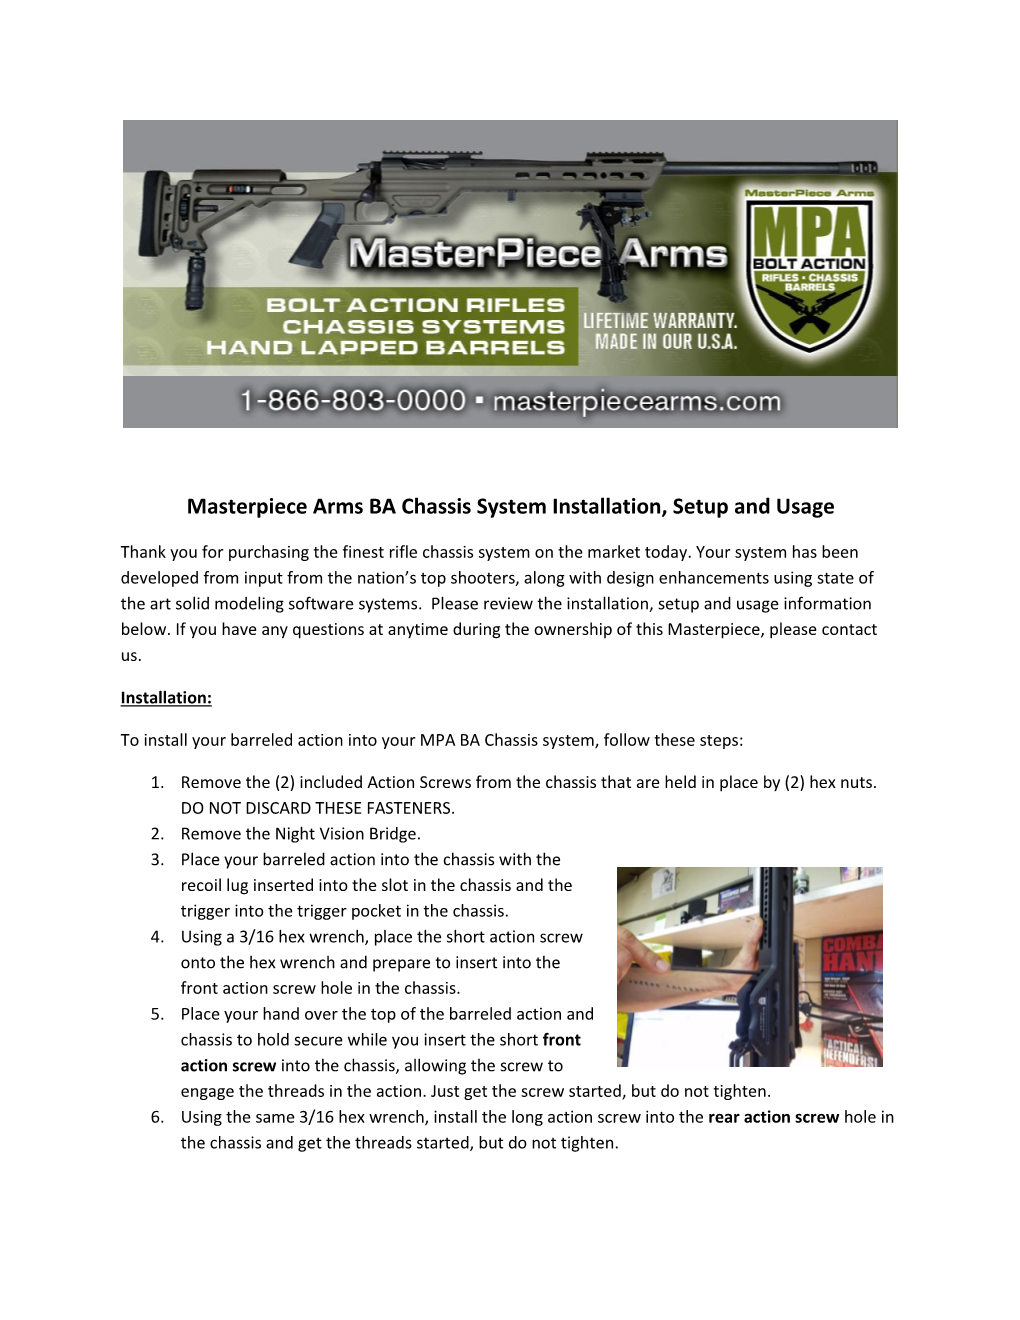 Masterpiece Arms BA Chassis System Installation, Setup and Usage